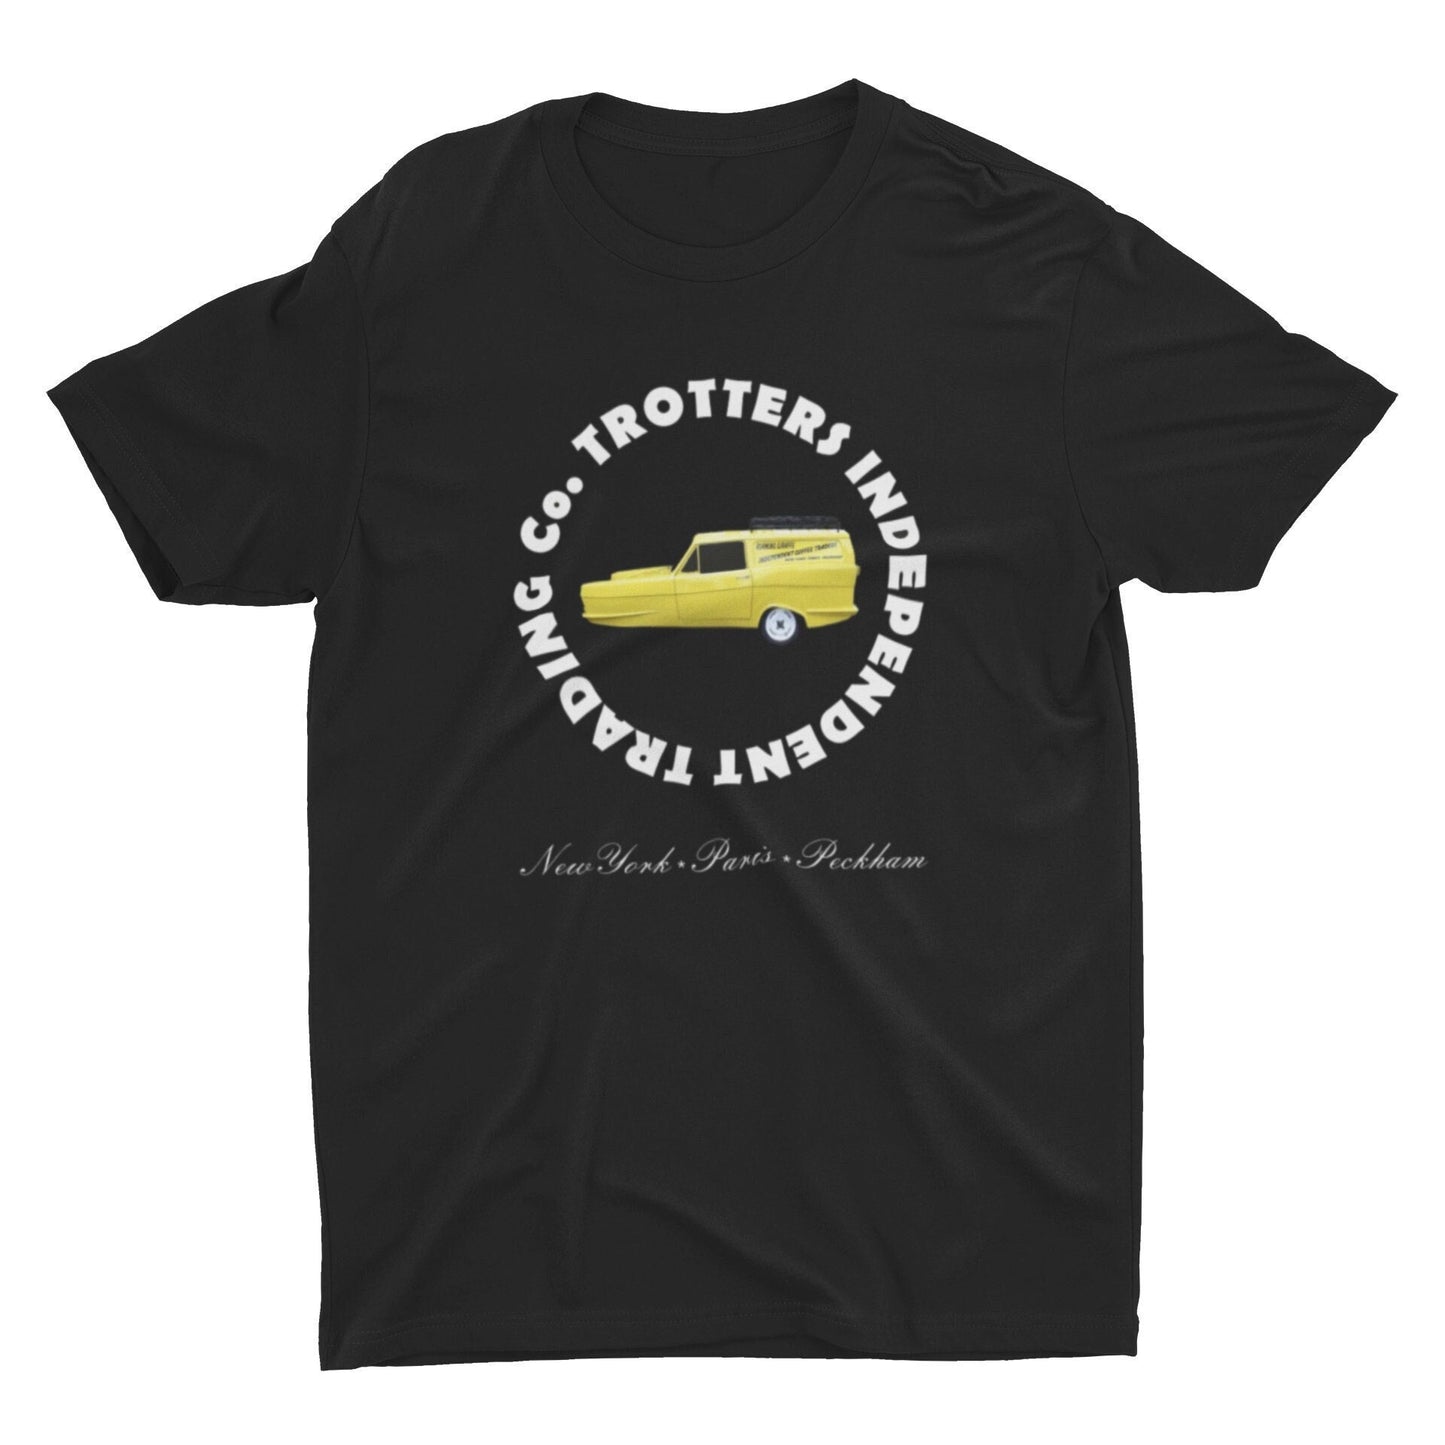 Only Fools & Horses T Shirt | Trotters Independent Trading Co. | Only Fools and Horses Gift | He Who Dares Wins